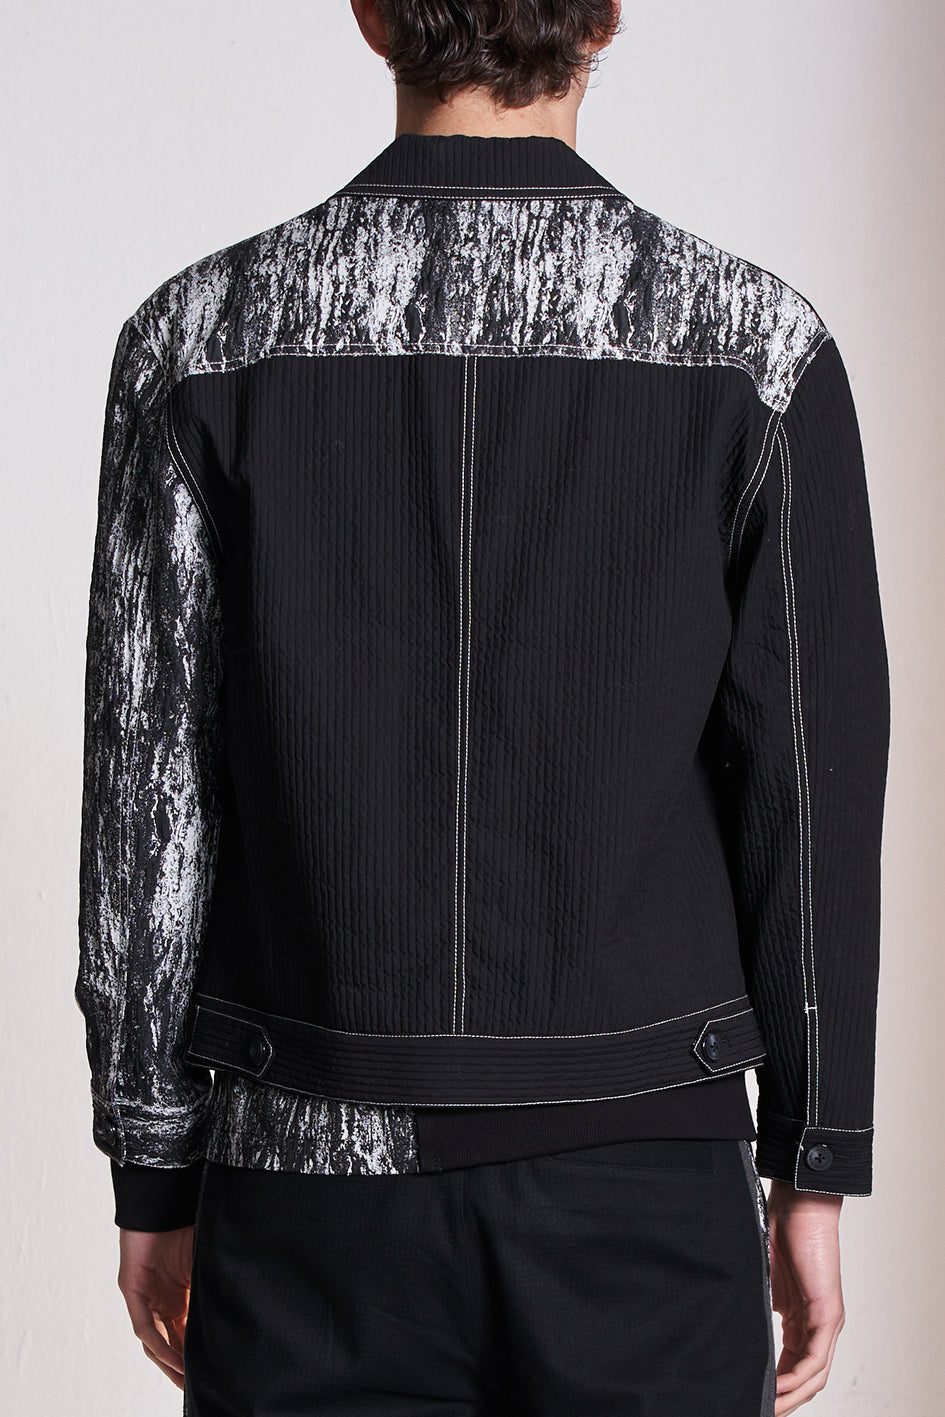 Texture Fabric Contrast Jacket